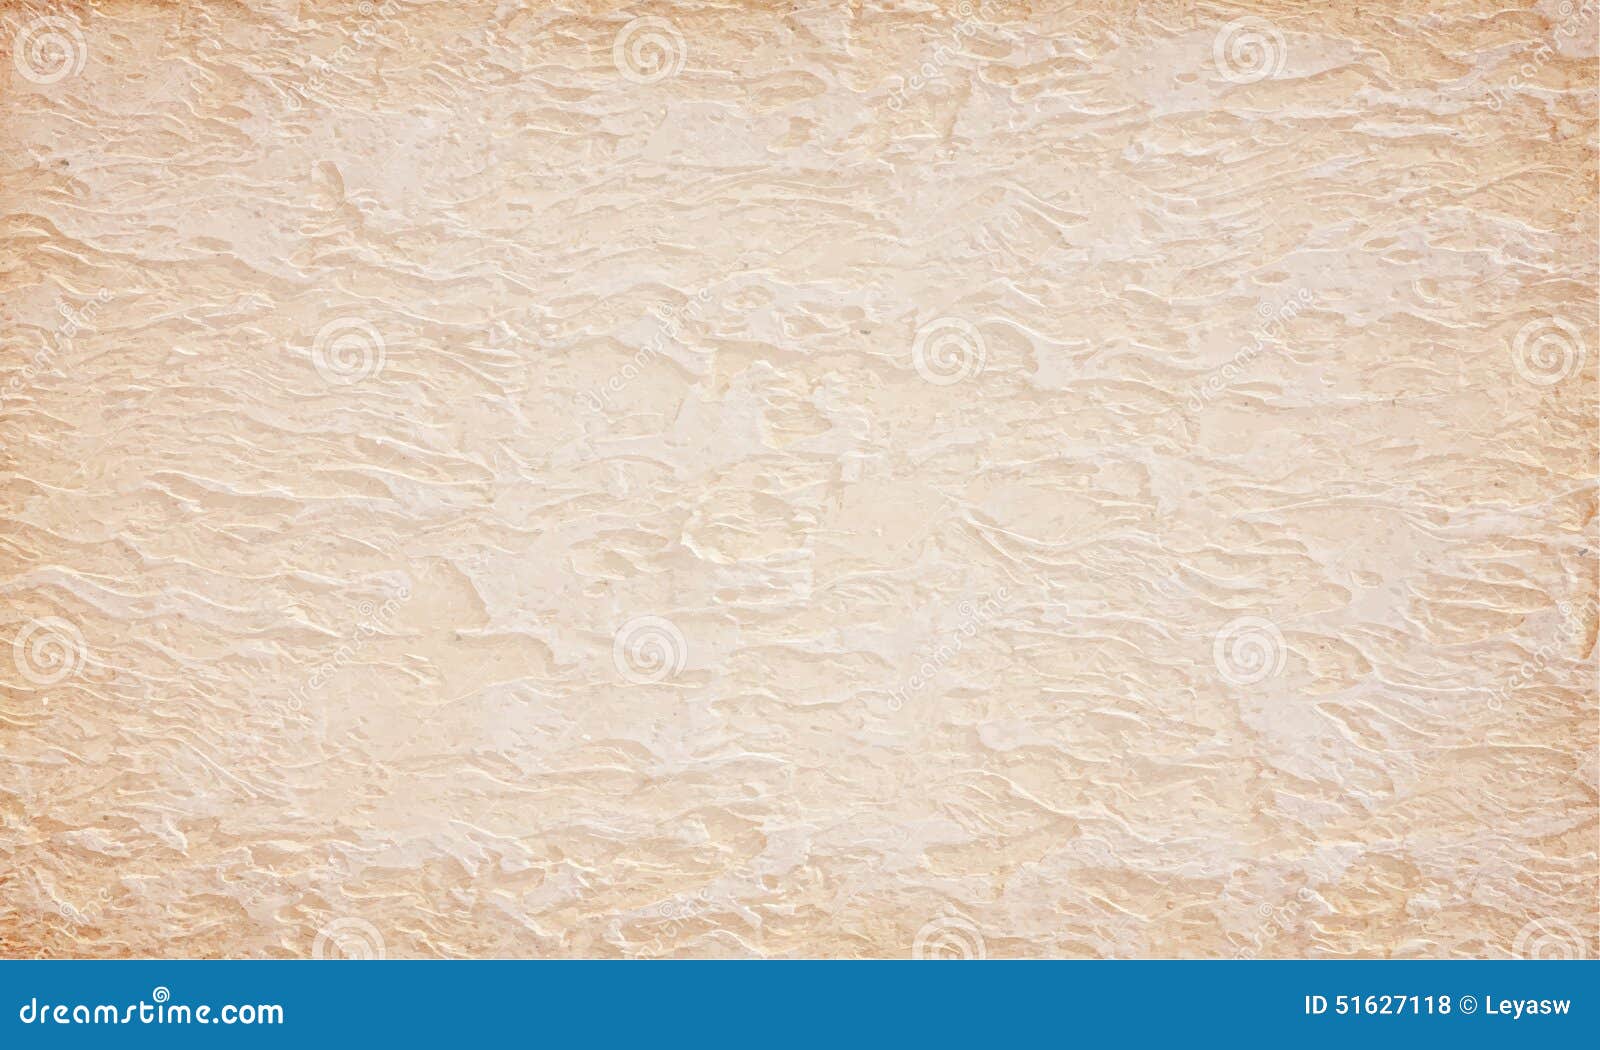 grunge horizontal beige background. wall with texture.  